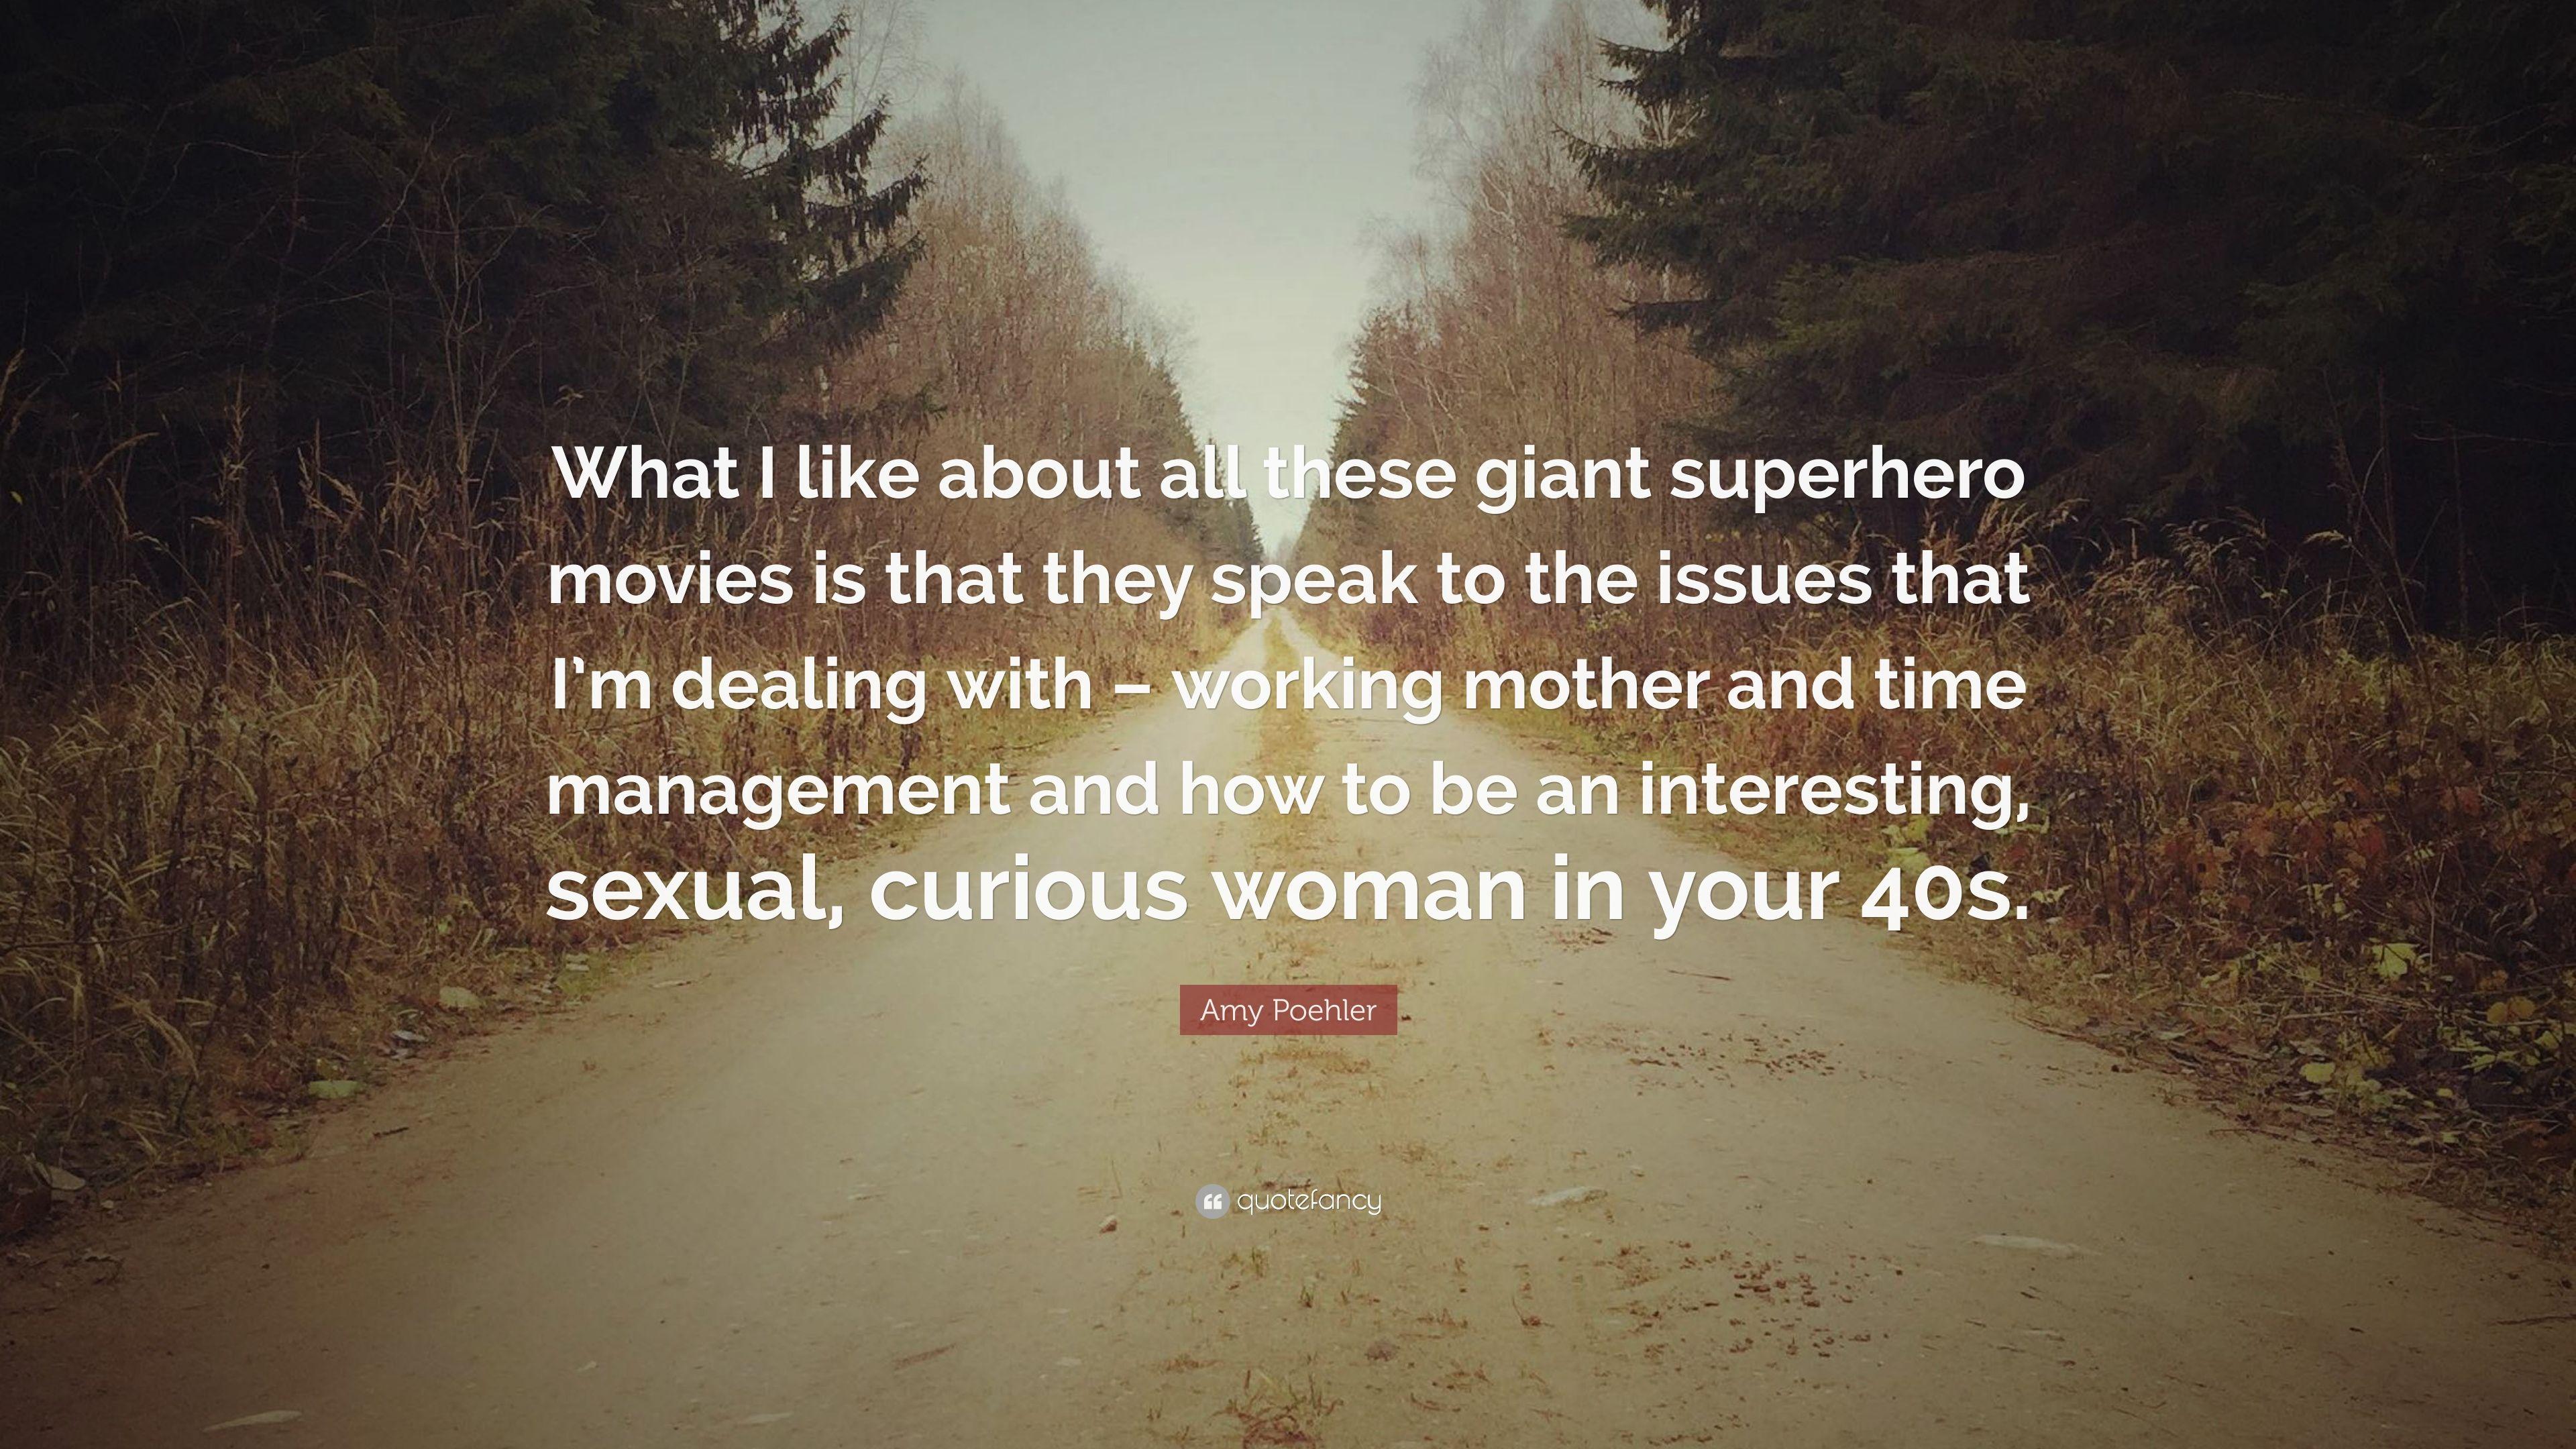 Amy Poehler Quote: “What I like about all these giant superhero